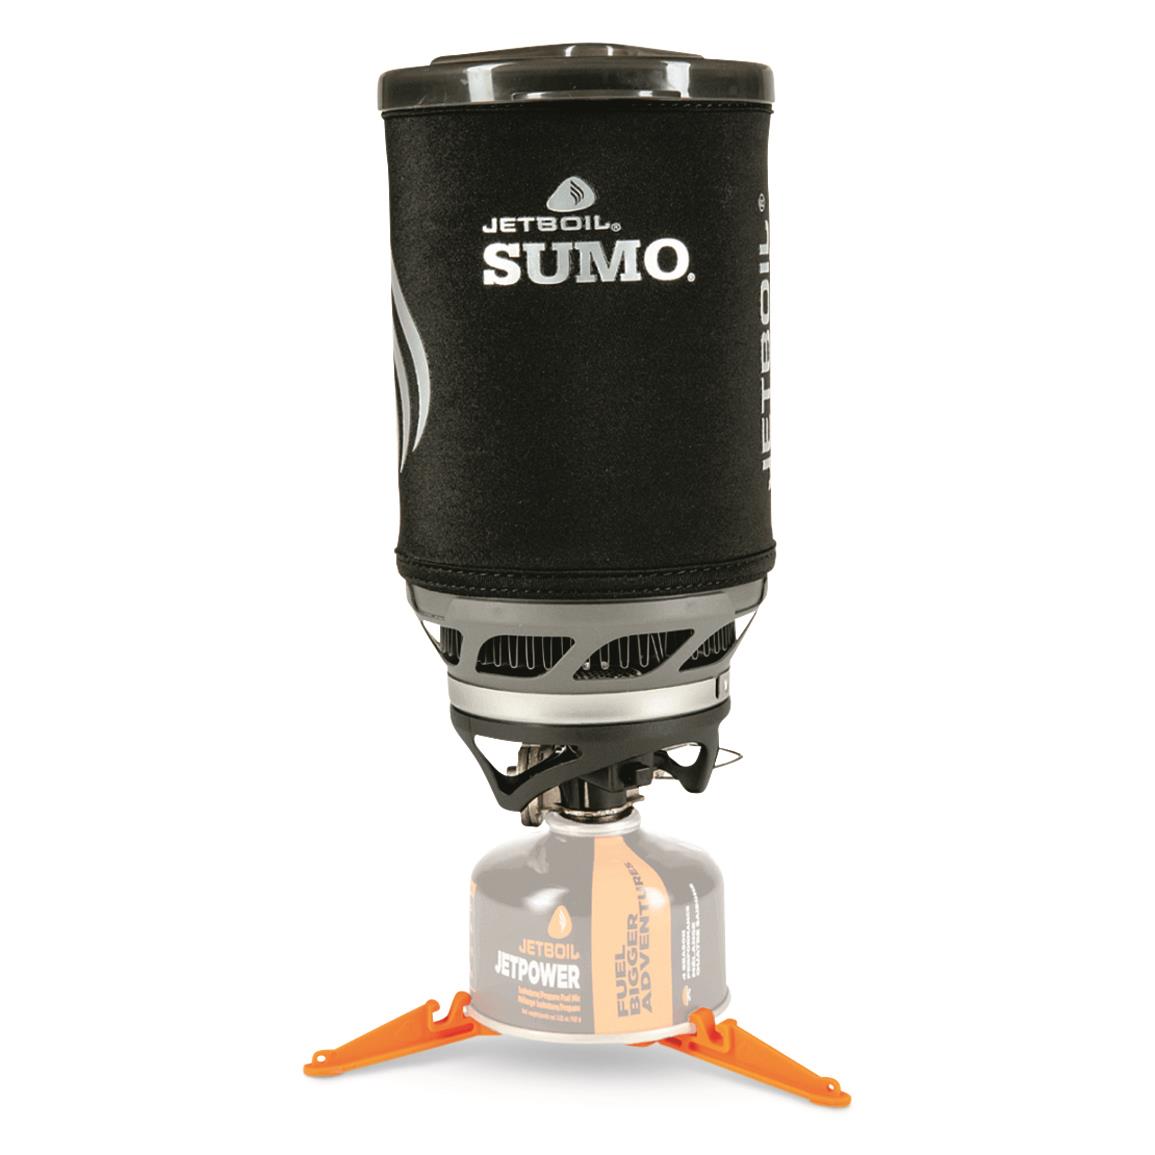 Jetboil Sumo Cooking System, Carbon